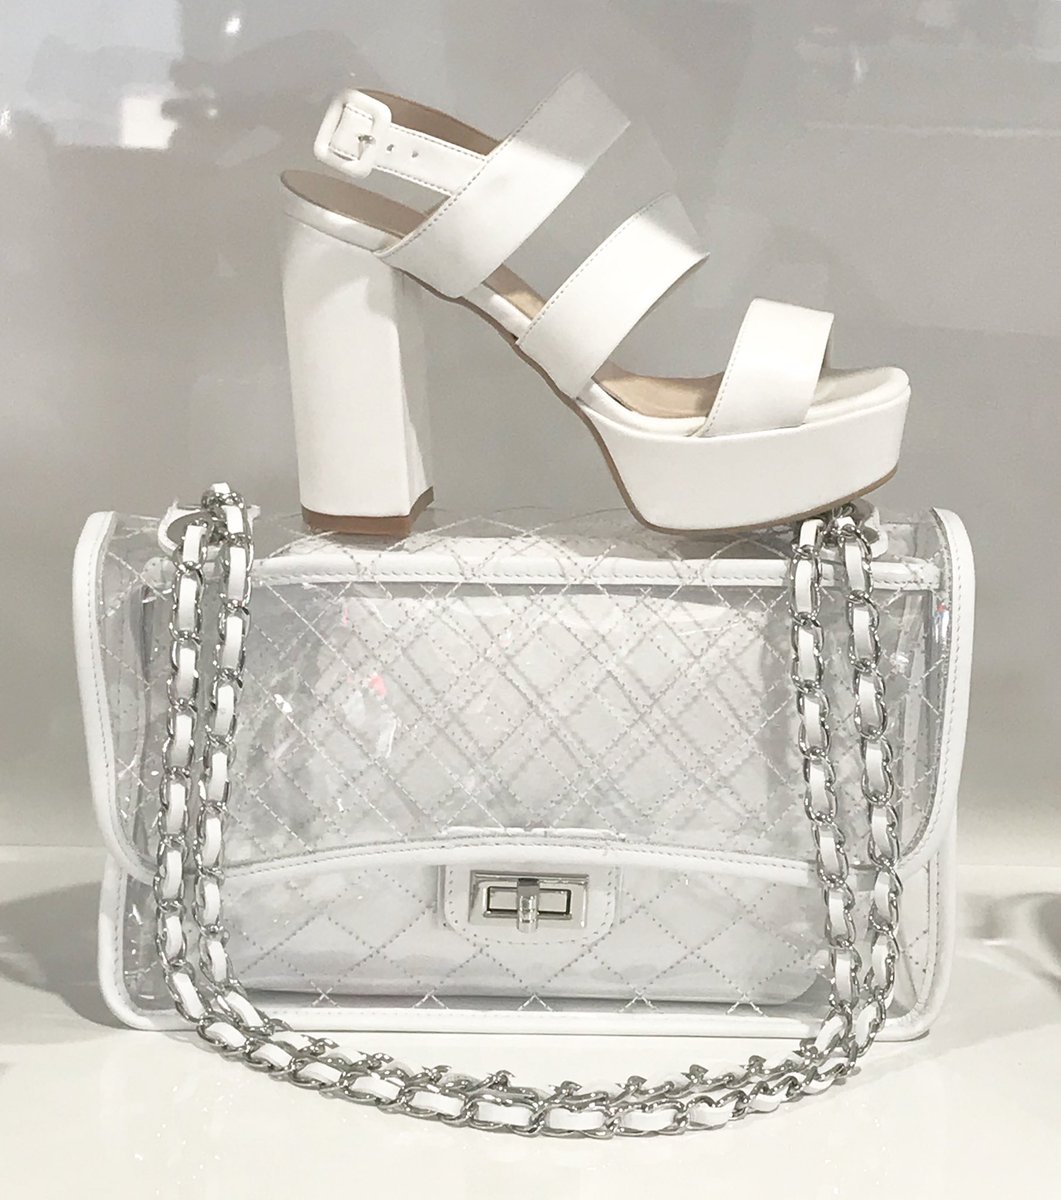 W H I T E 🥛 

#LoulaShoes NEW handbags and shoes by #LucianaBellucci  

#highheels #heels #handbag #whitehandbag #clearhandbag #clearbag #seethrough #platforms #strappyheels #whiteshoes 

#Loula #ToorakRoad #SouthYarra #Melbourne 

⛸🥛🍦🥚🥥☁️🕊